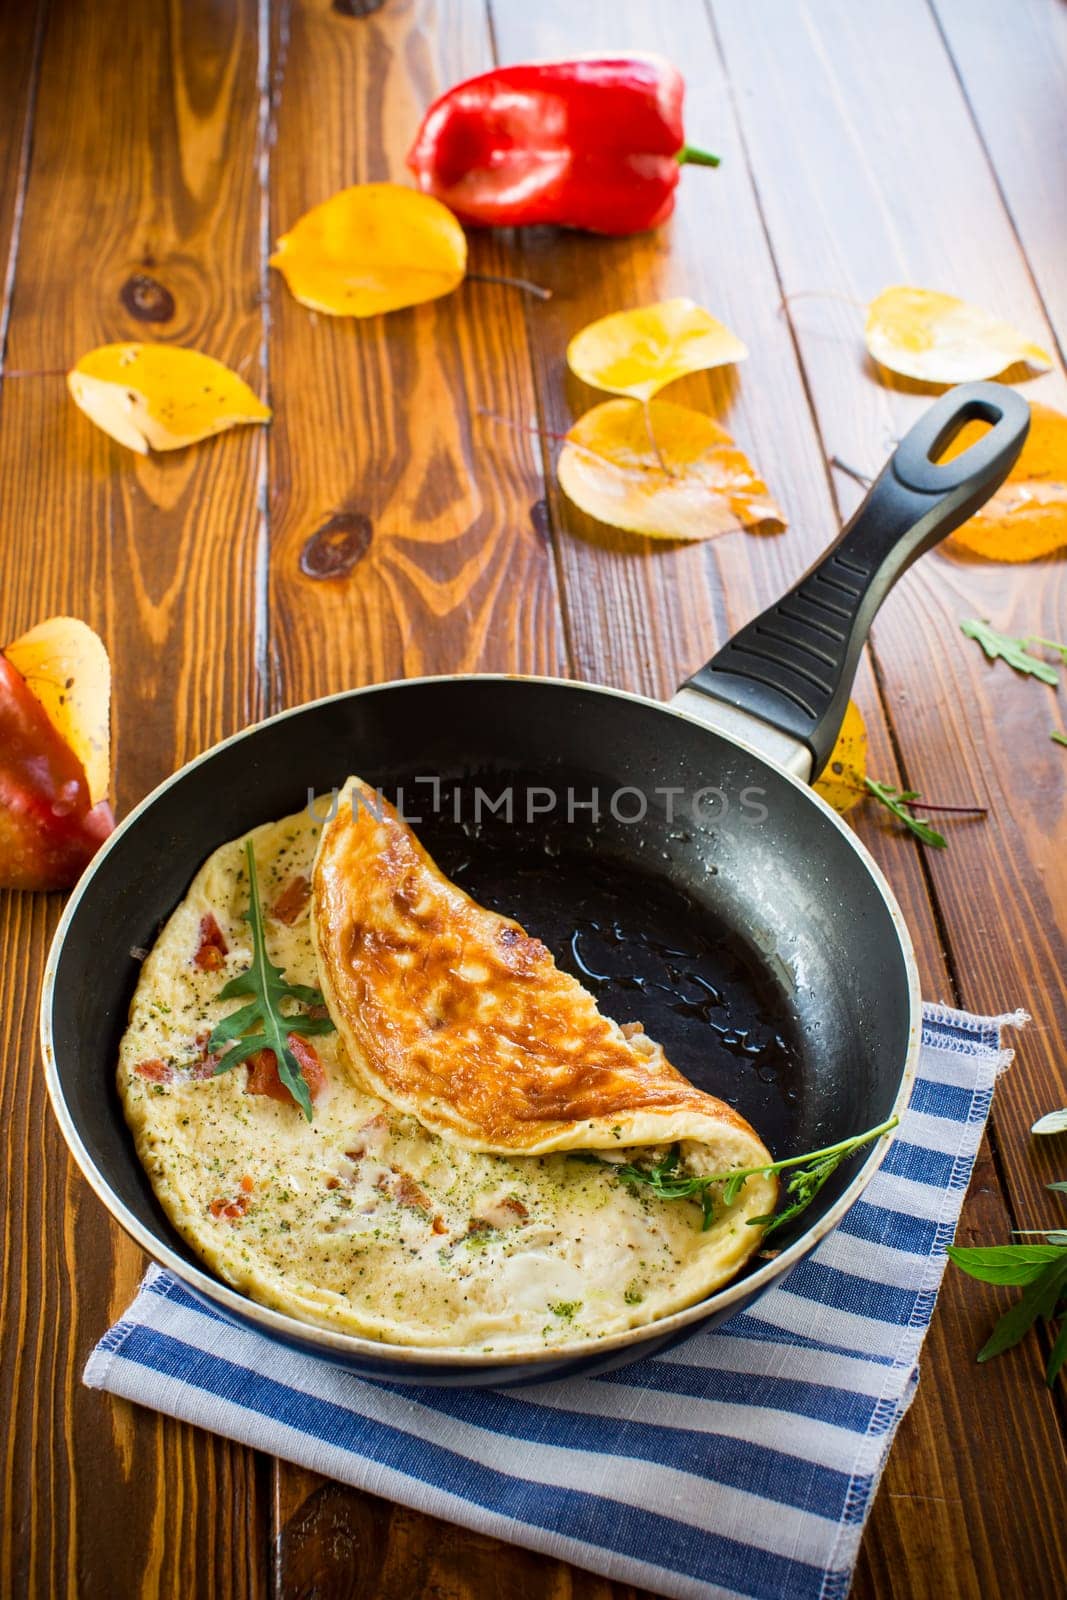 Fried omelets with various autumn vegetables in a frying pan on a wooden table. Autumn recipes.